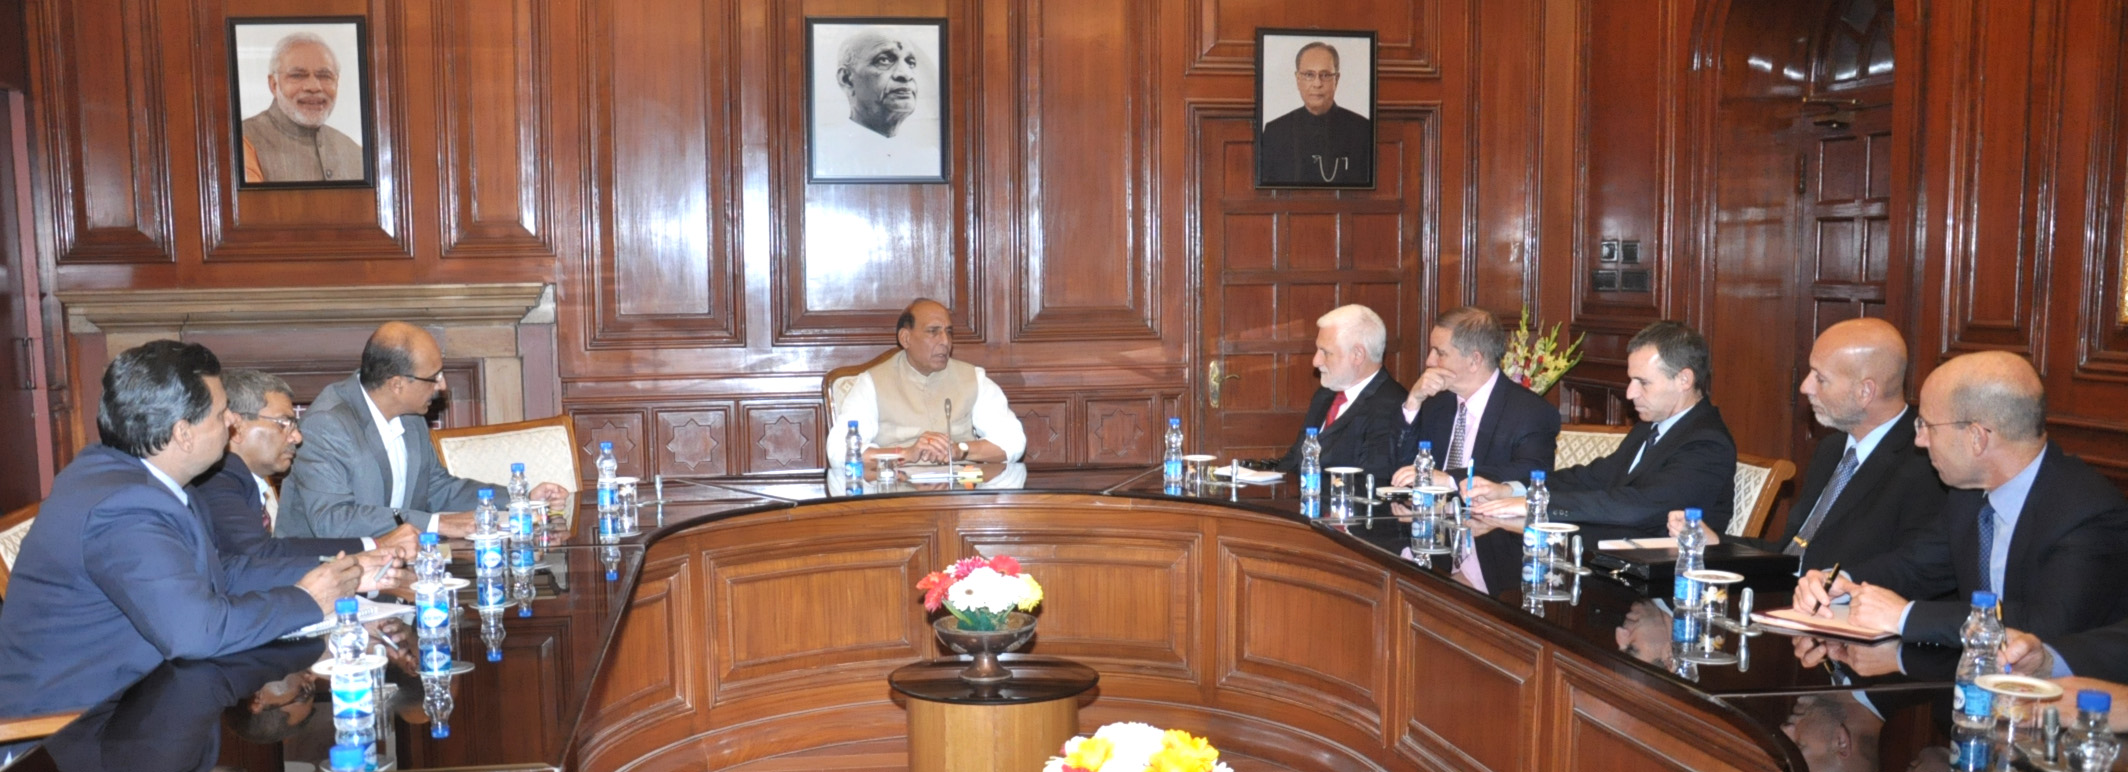 An Israeli delegation led by the Director-General of the Israeli Ministry of Defence, Maj. Gen. (Res.) Dan Harel meeting the Union Home Minister, Shri Rajnath Singh, in New Delhi on February 17, 2016.